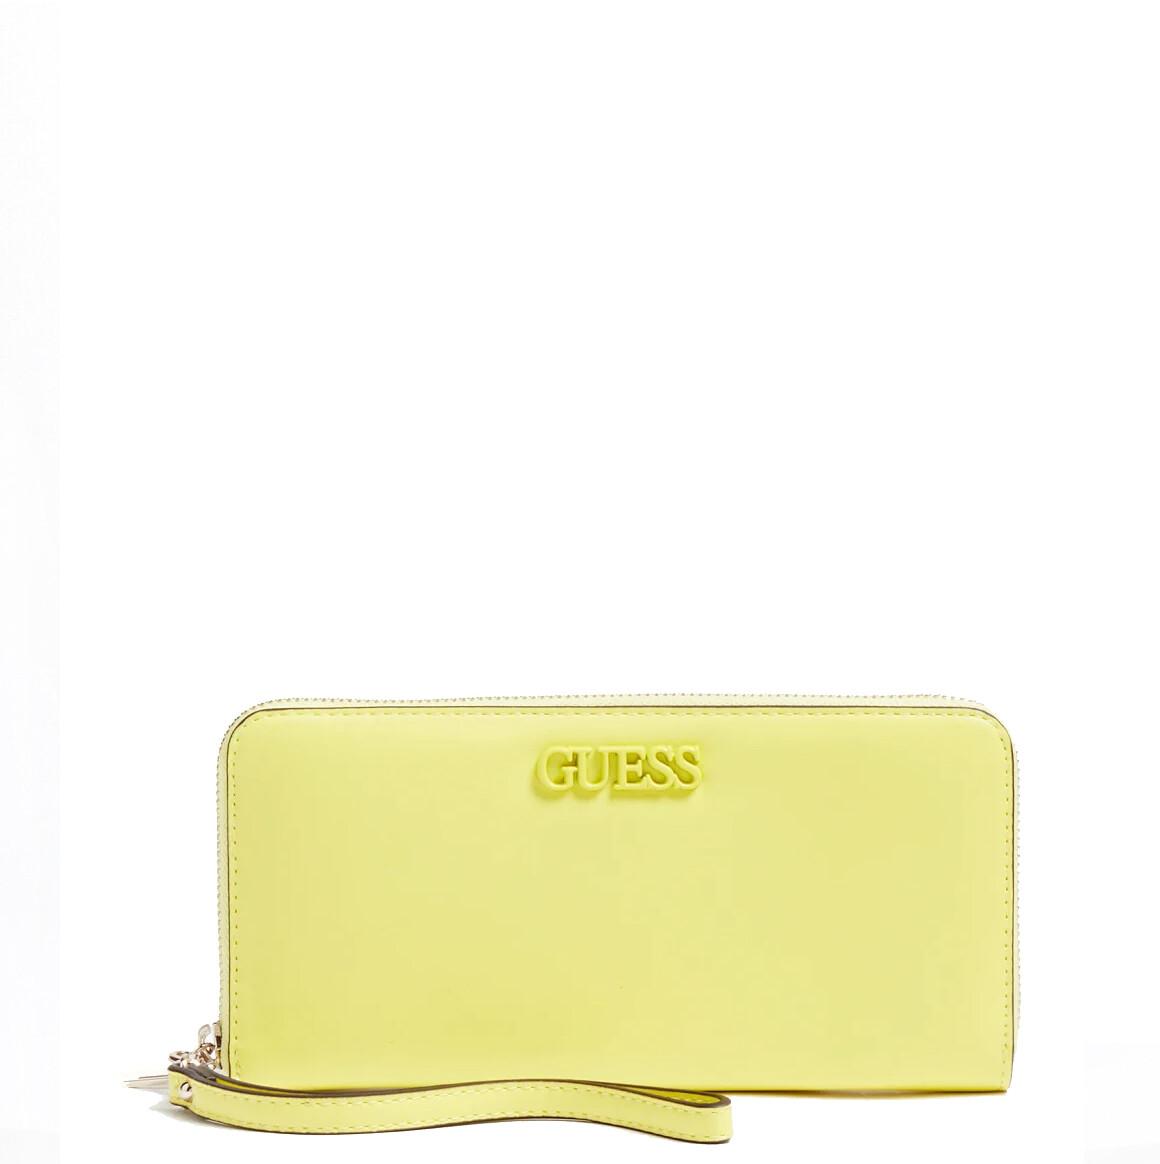 Replying to @Chelsie 🍒 yellow tag purses 🌼 #yellowtagsale